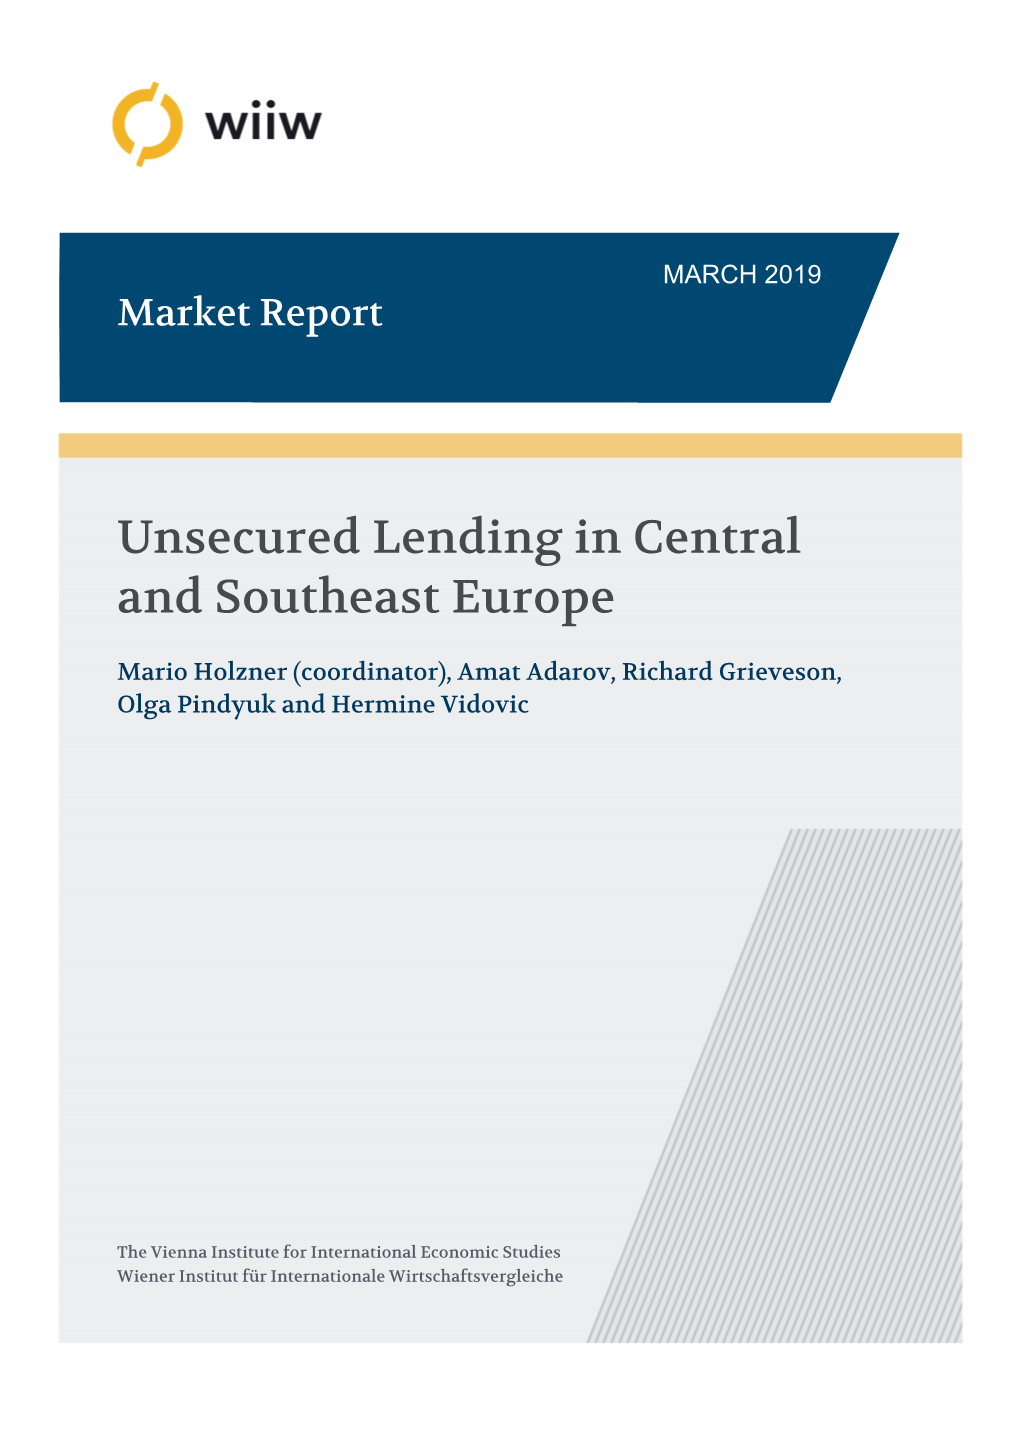 Unsecured Lending in Central and Southeast Europe